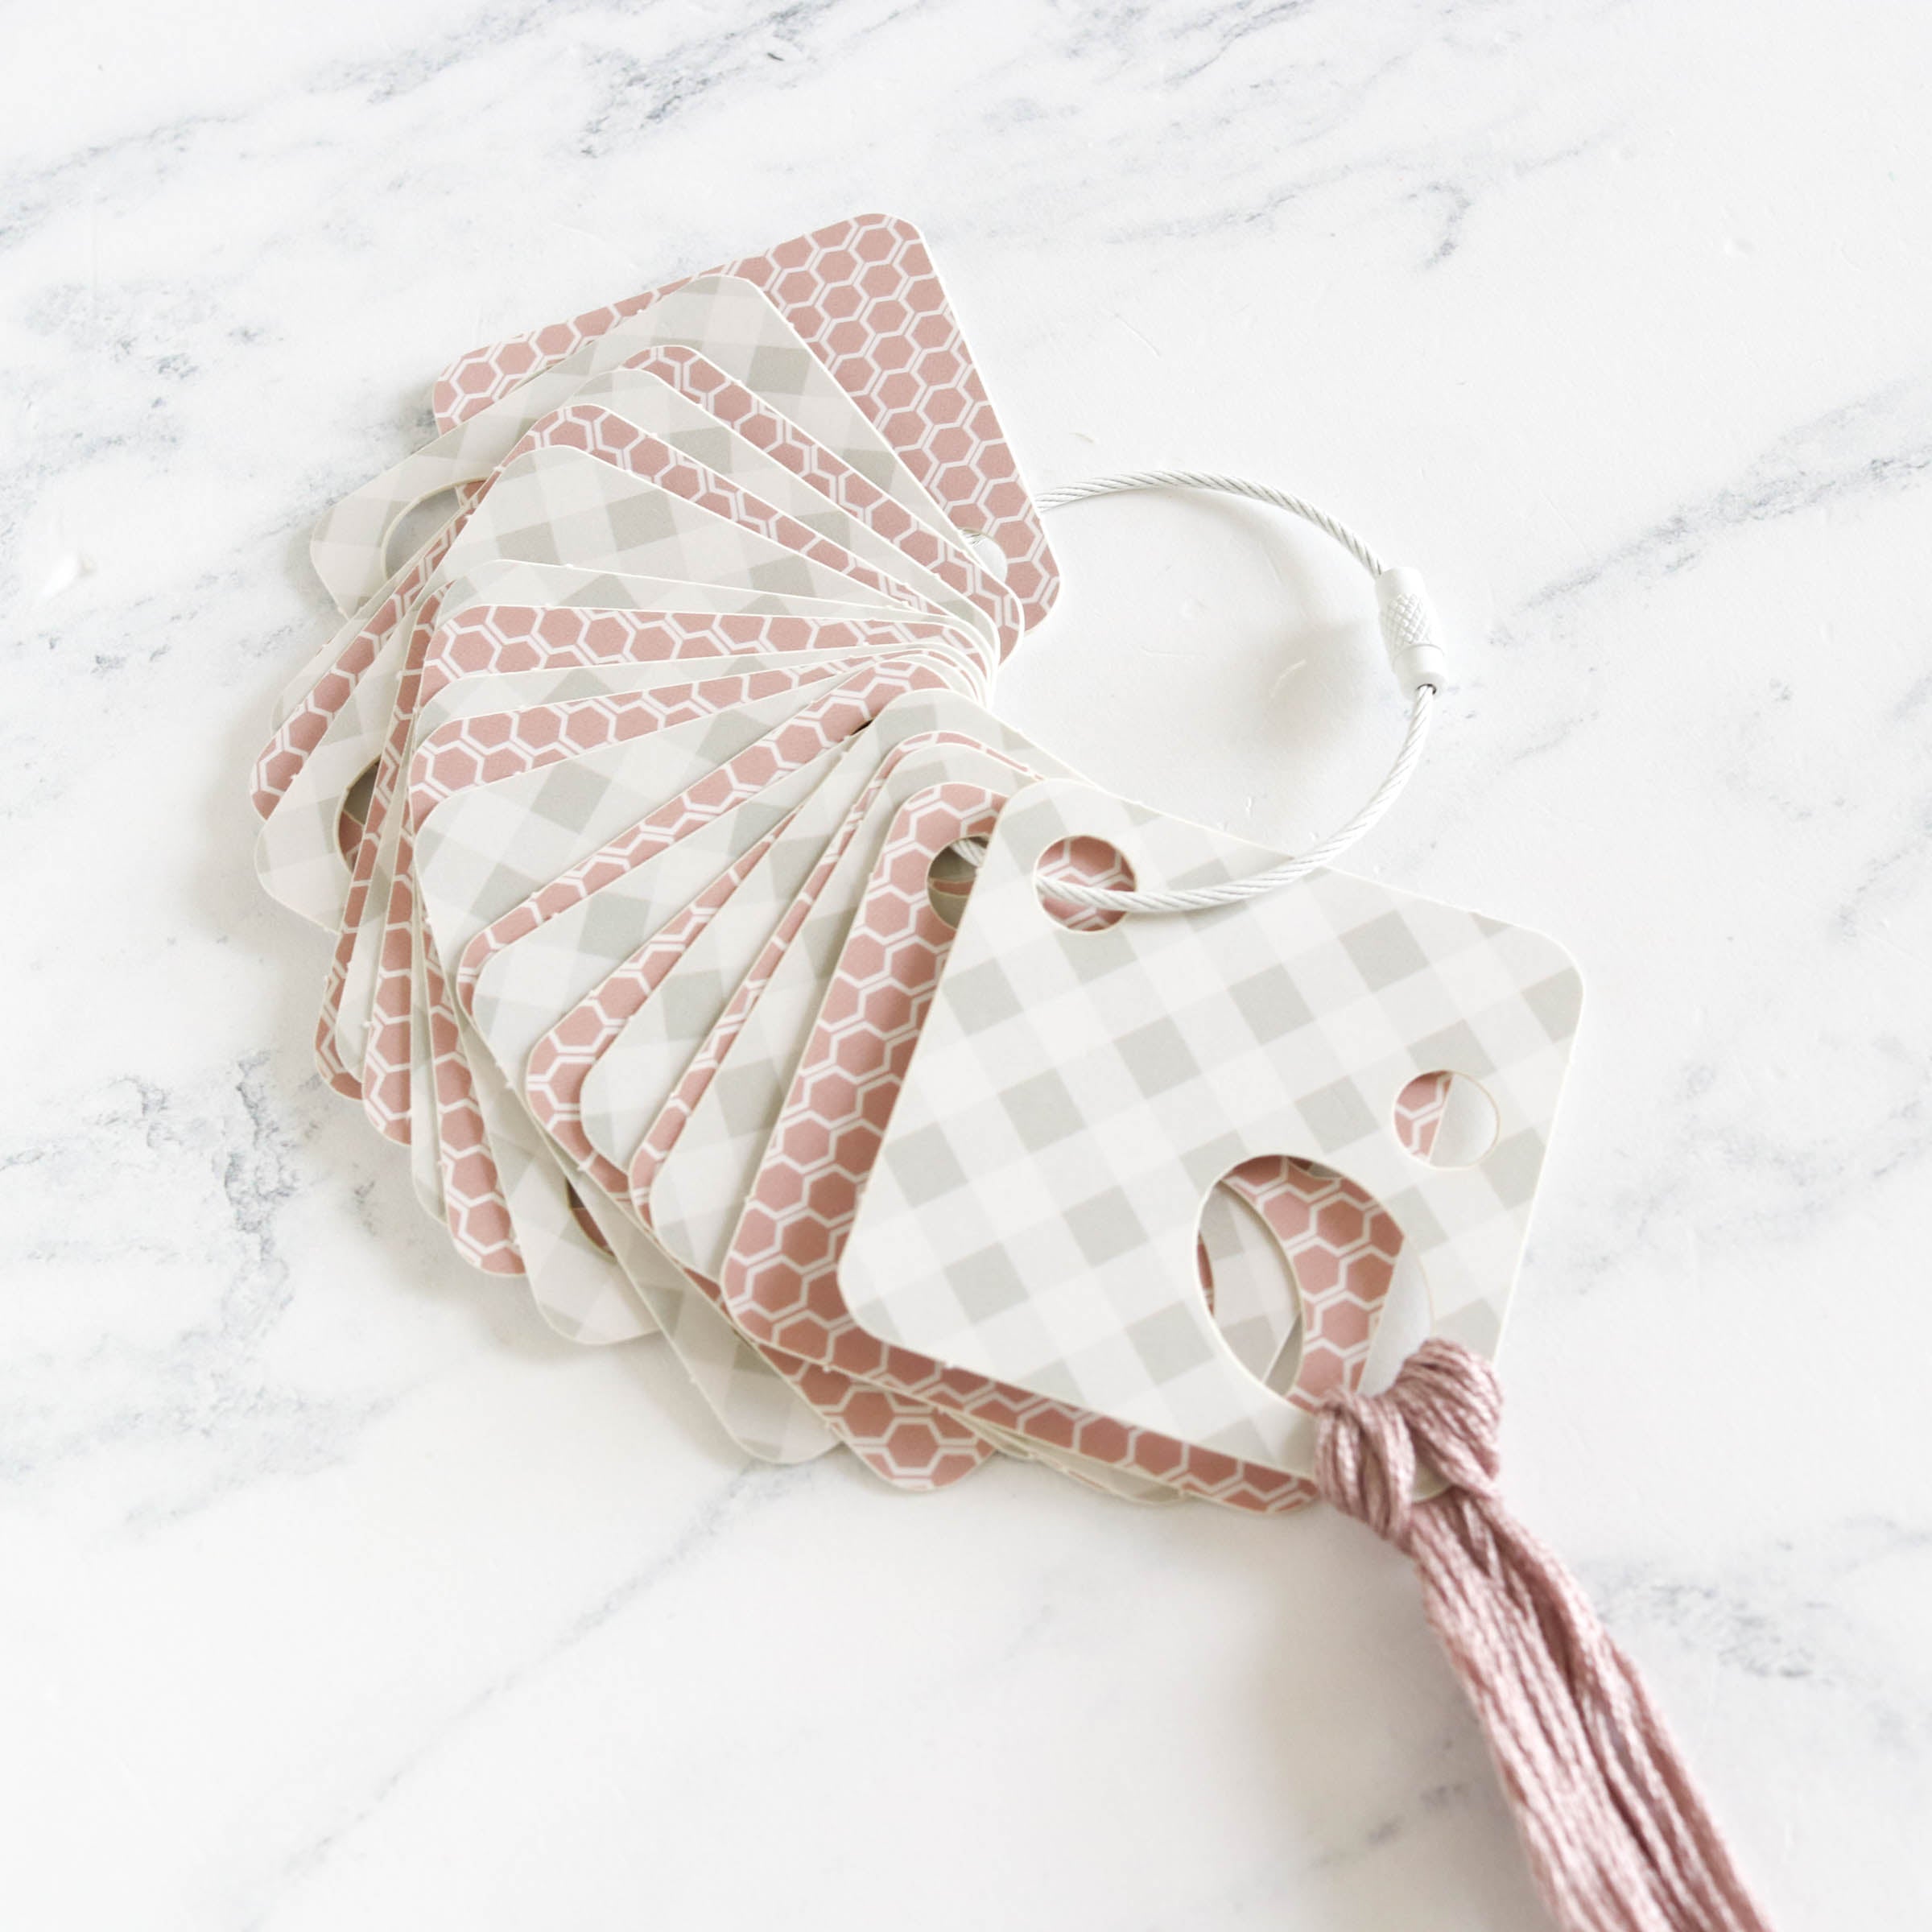 Embroidery Floss Drop Set - Gingham + Hexies - Stitched Modern